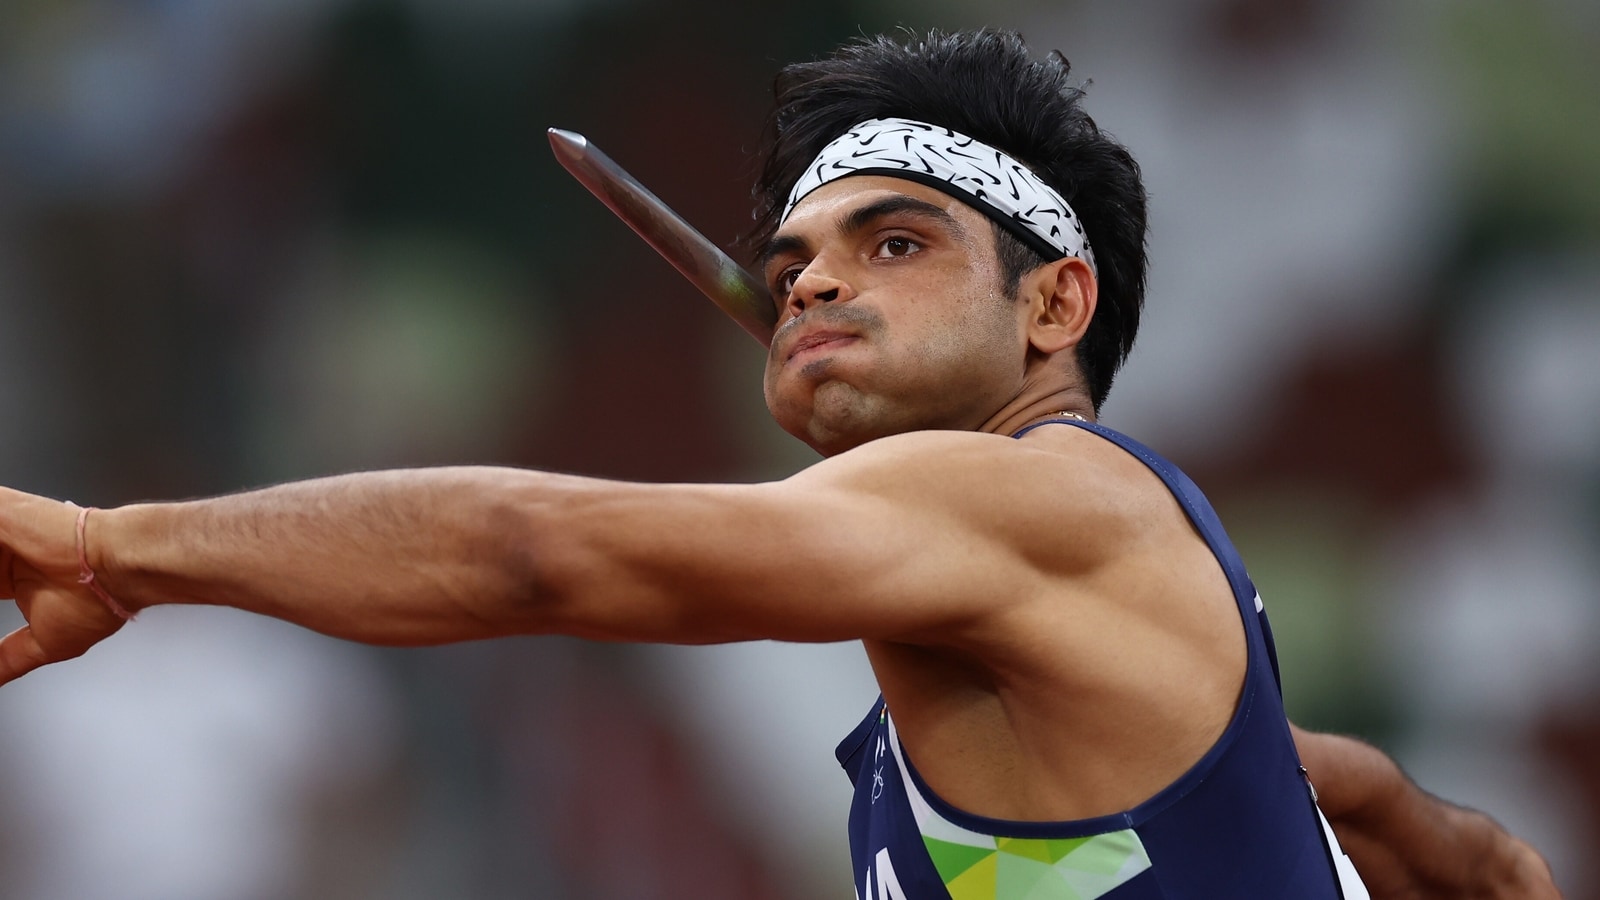 Neeraj Chopra's historic gold medal makes Tokyo 2020 India's best ever Olympics campaign list of medal winners